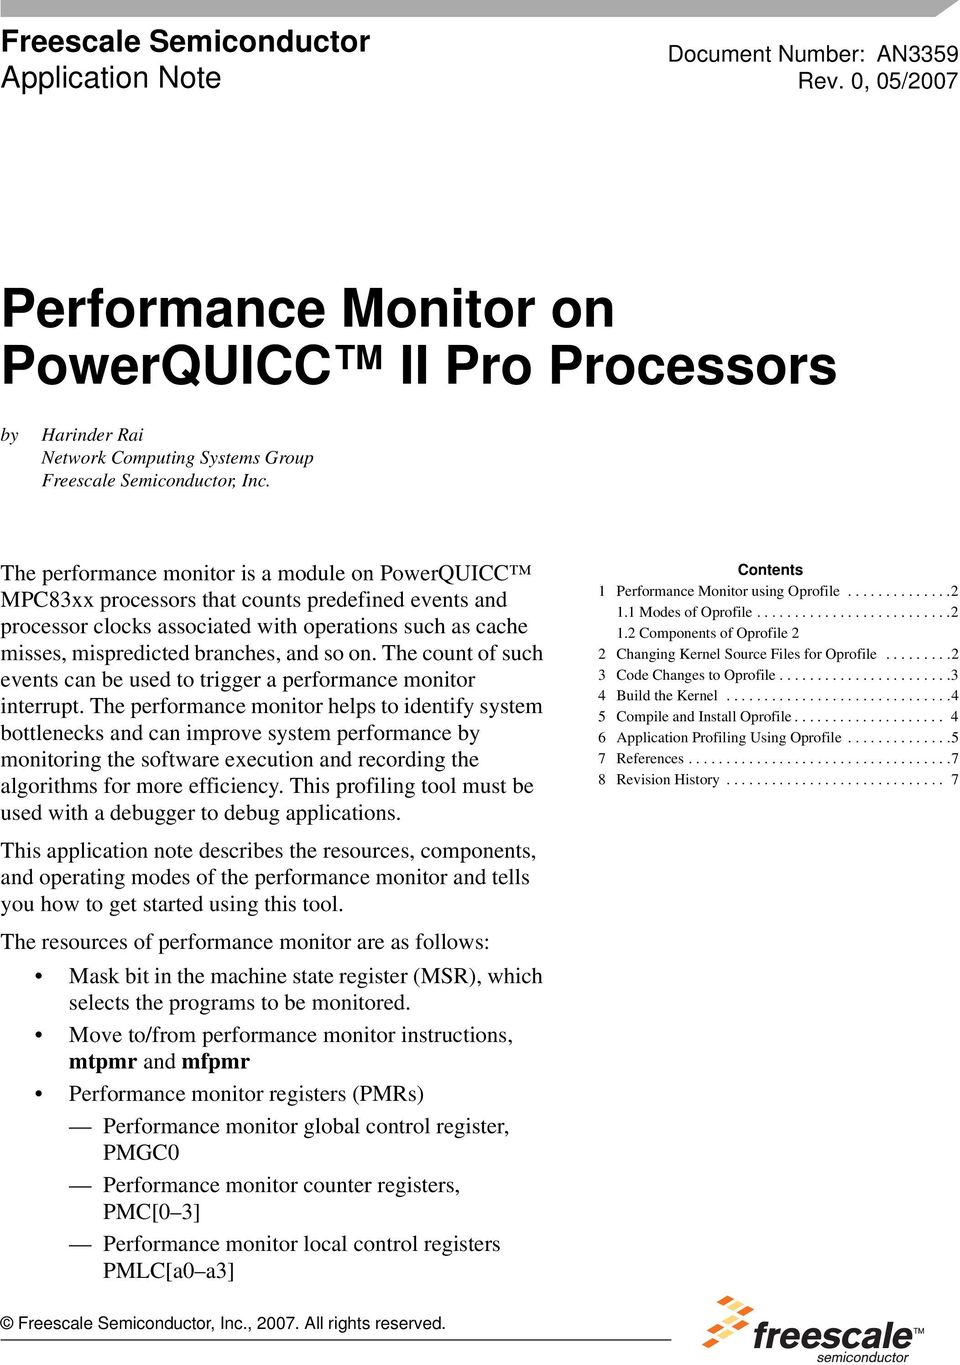 The performance monitor is a module on PowerQUICC MPC83xx processors that counts predefined events and processor clocks associated with operations such as cache misses, mispredicted branches, and so